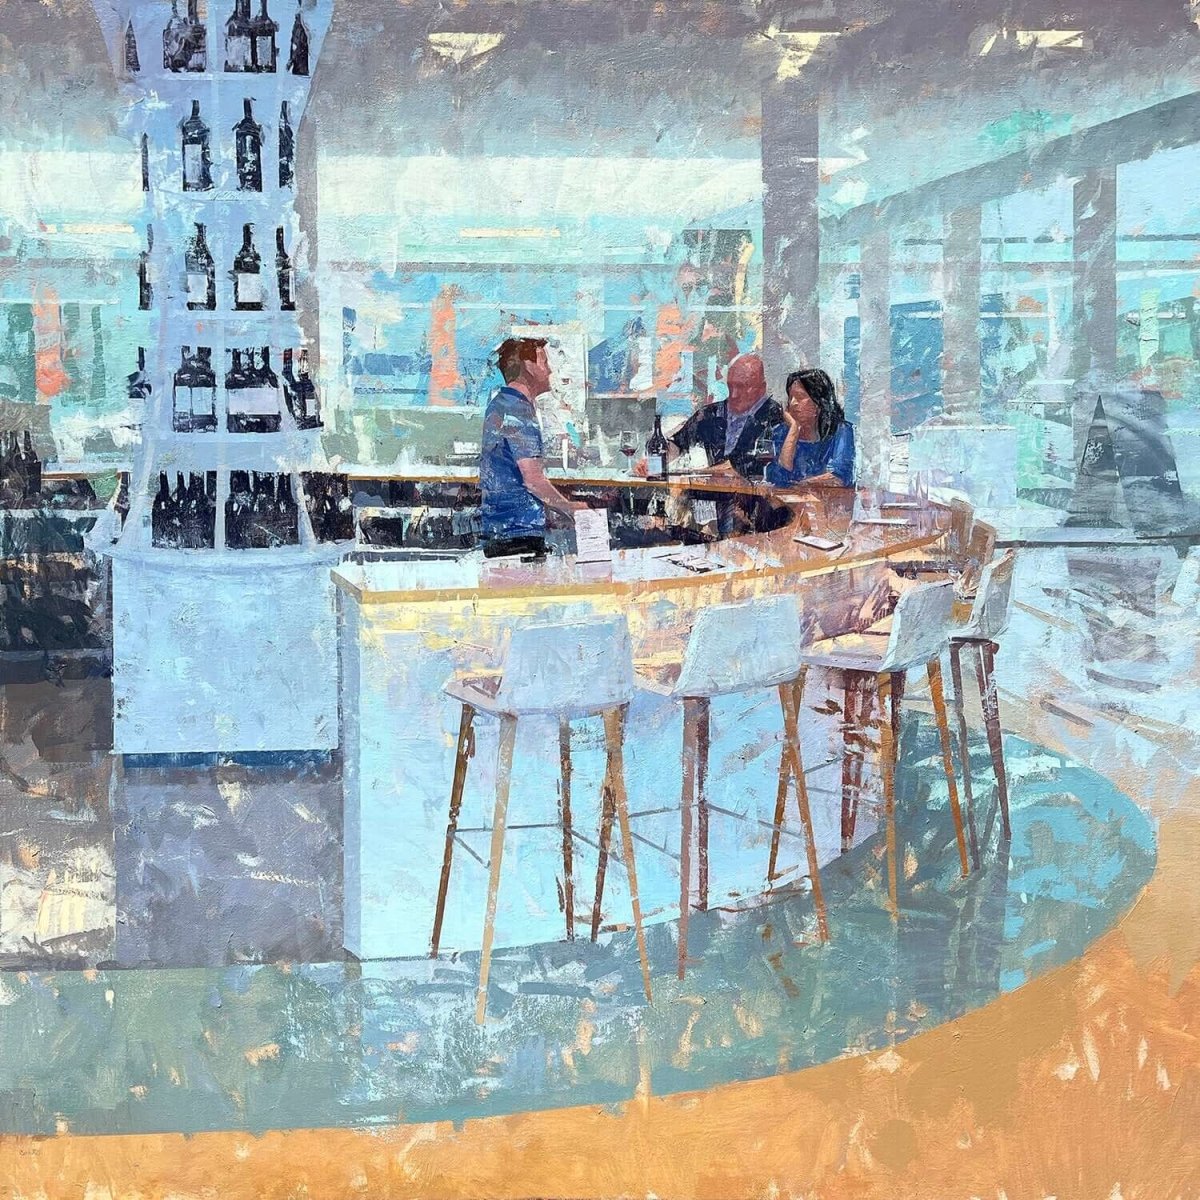 Tasting Room by Mark Bailey at LePrince Galleries